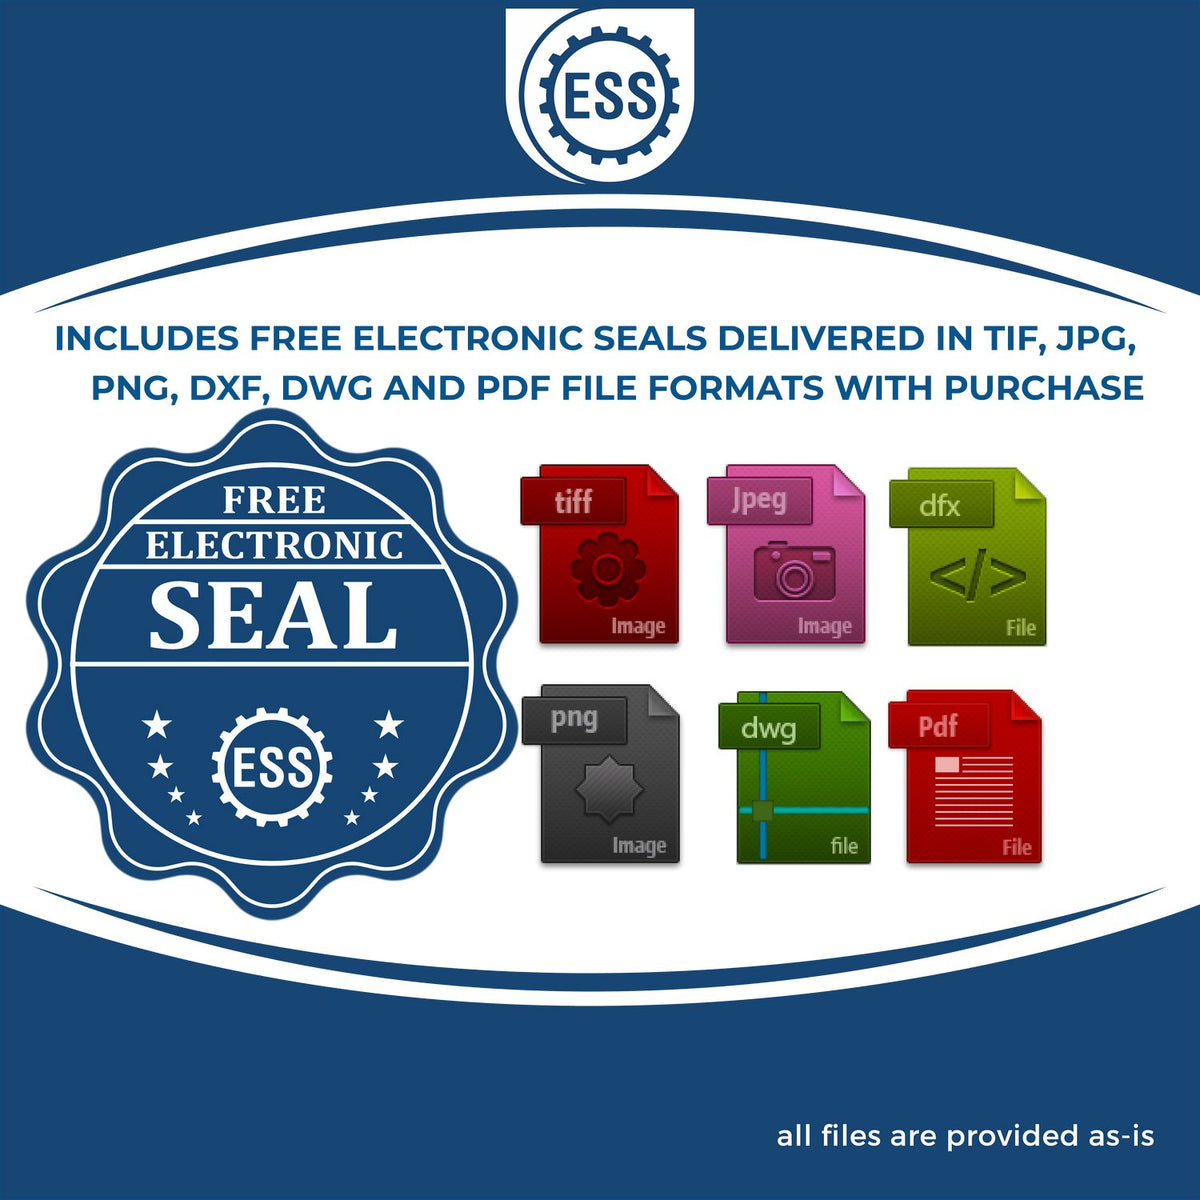 An infographic for the free electronic seal for the Soft Tennessee Professional Geologist Seal illustrating the different file type icons such as DXF, DWG, TIF, JPG and PNG.